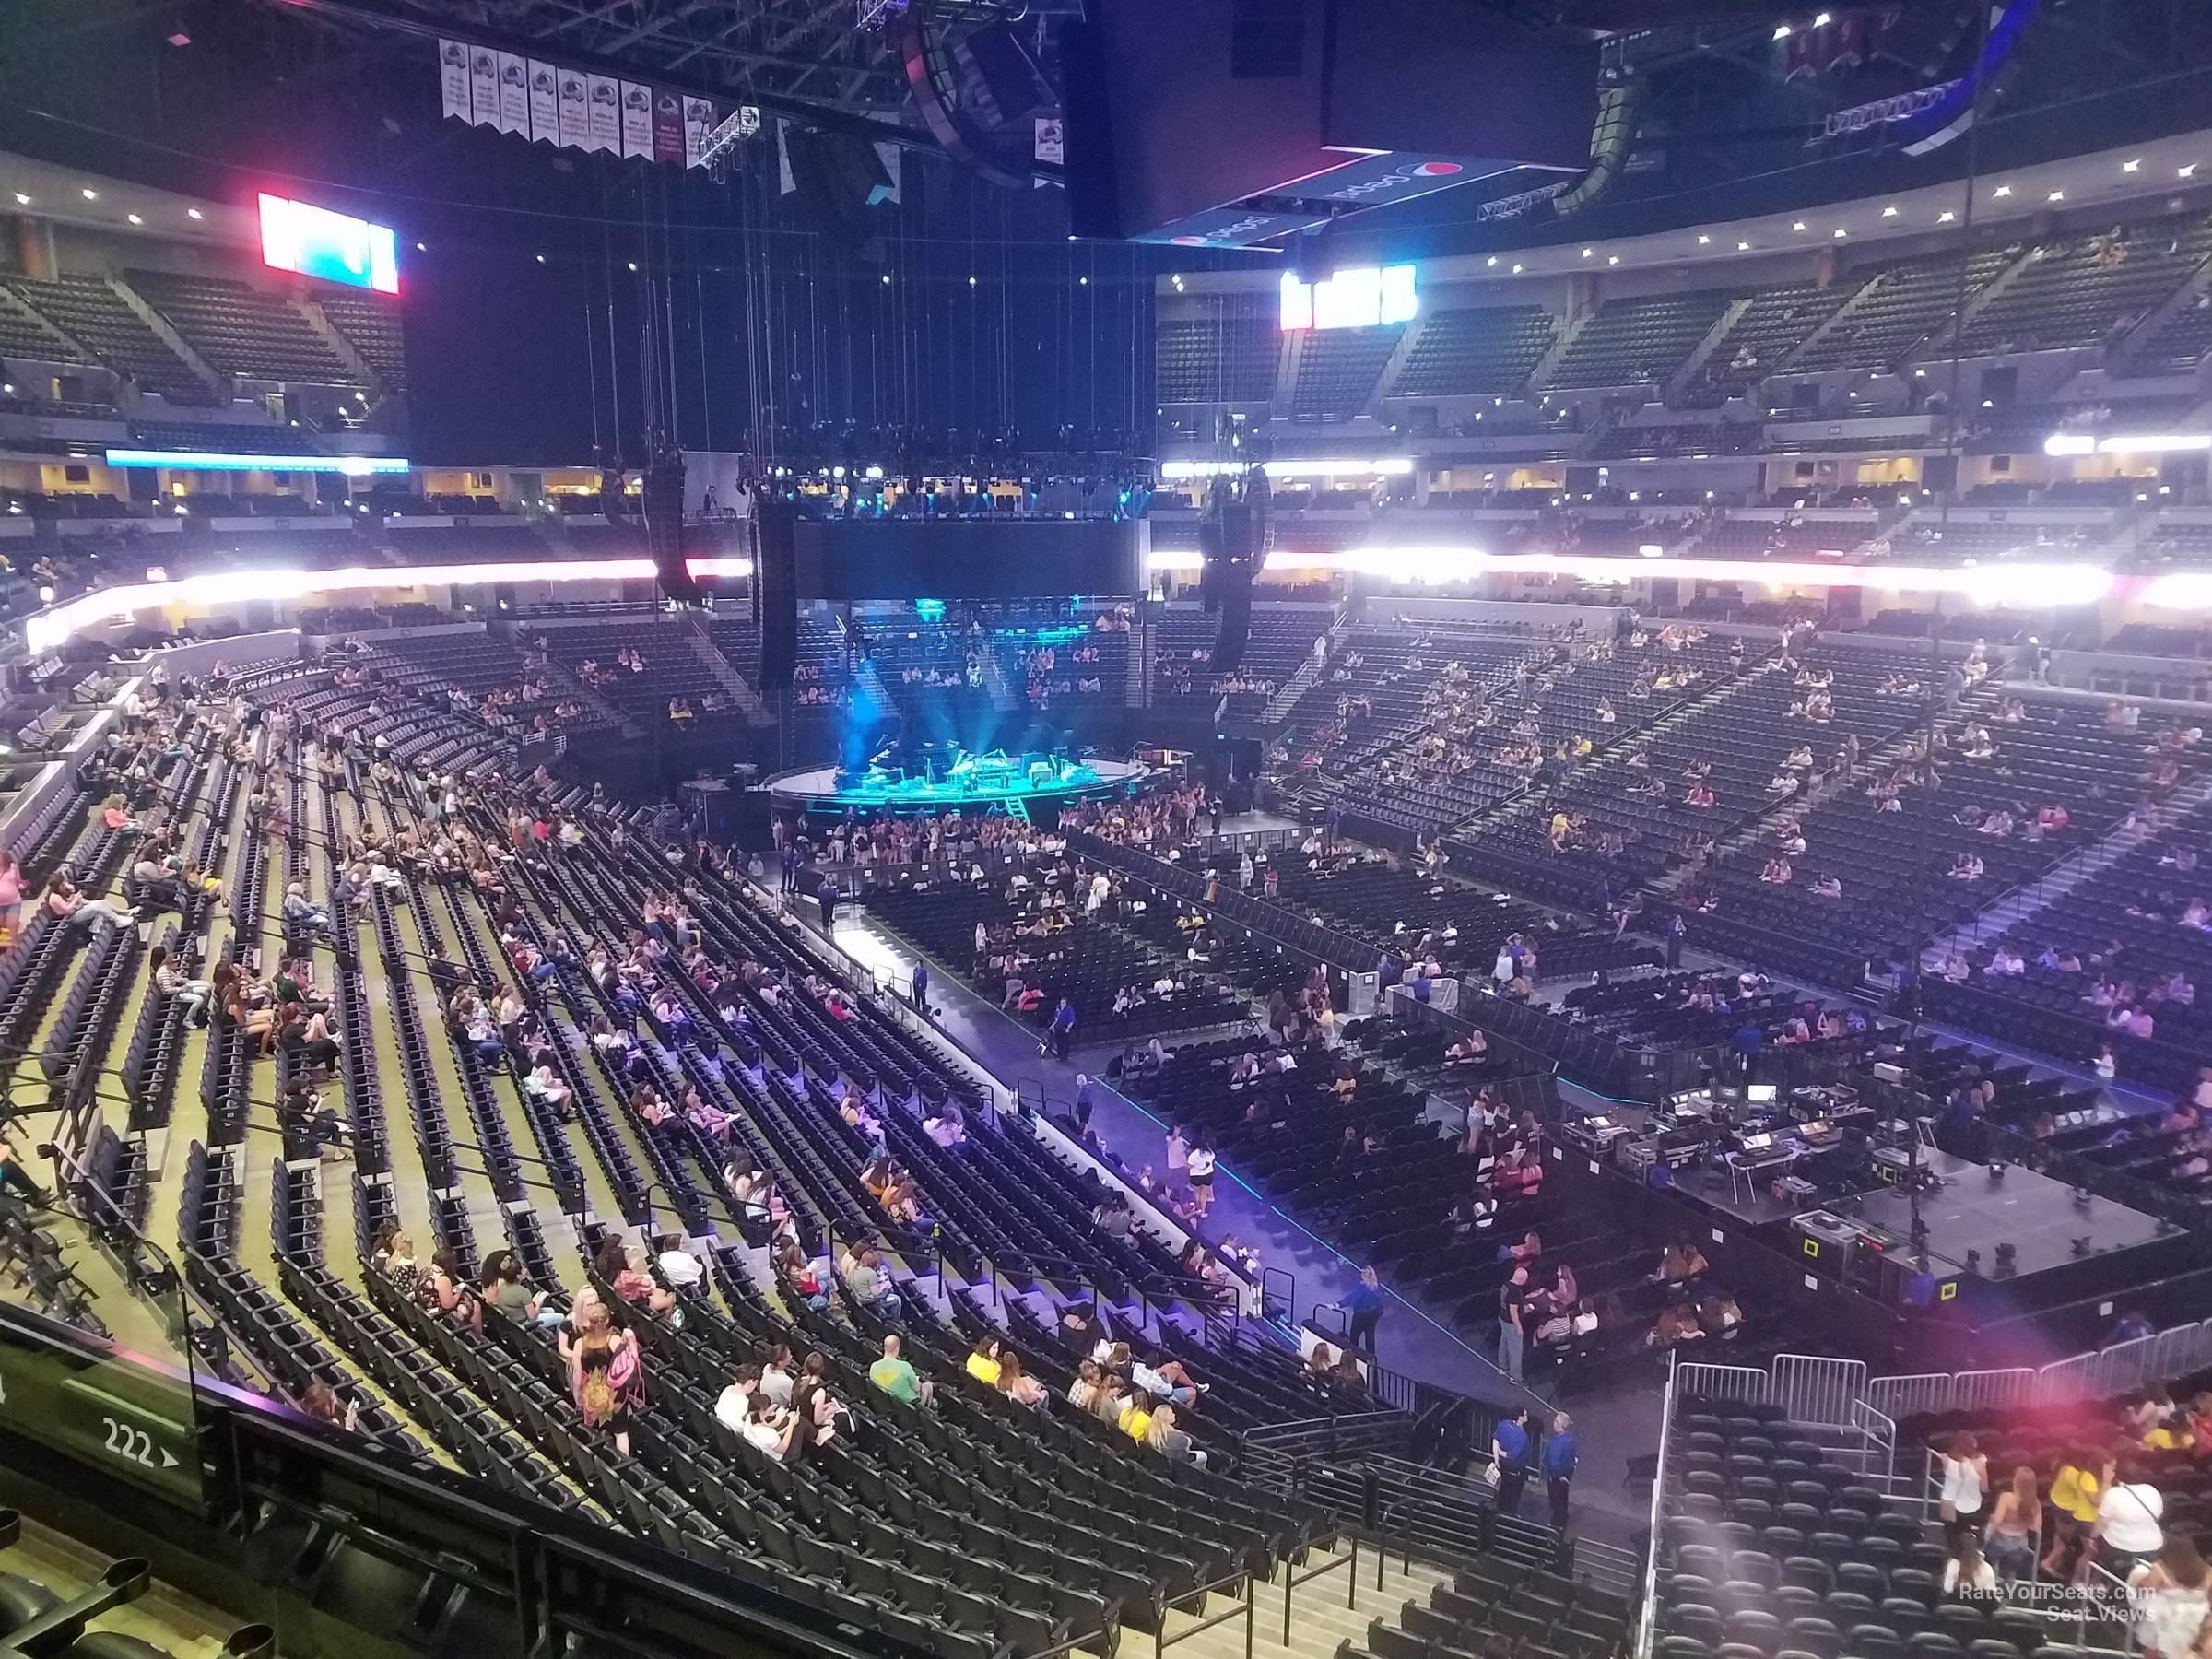 section 222, row 4 seat view  for concert - ball arena